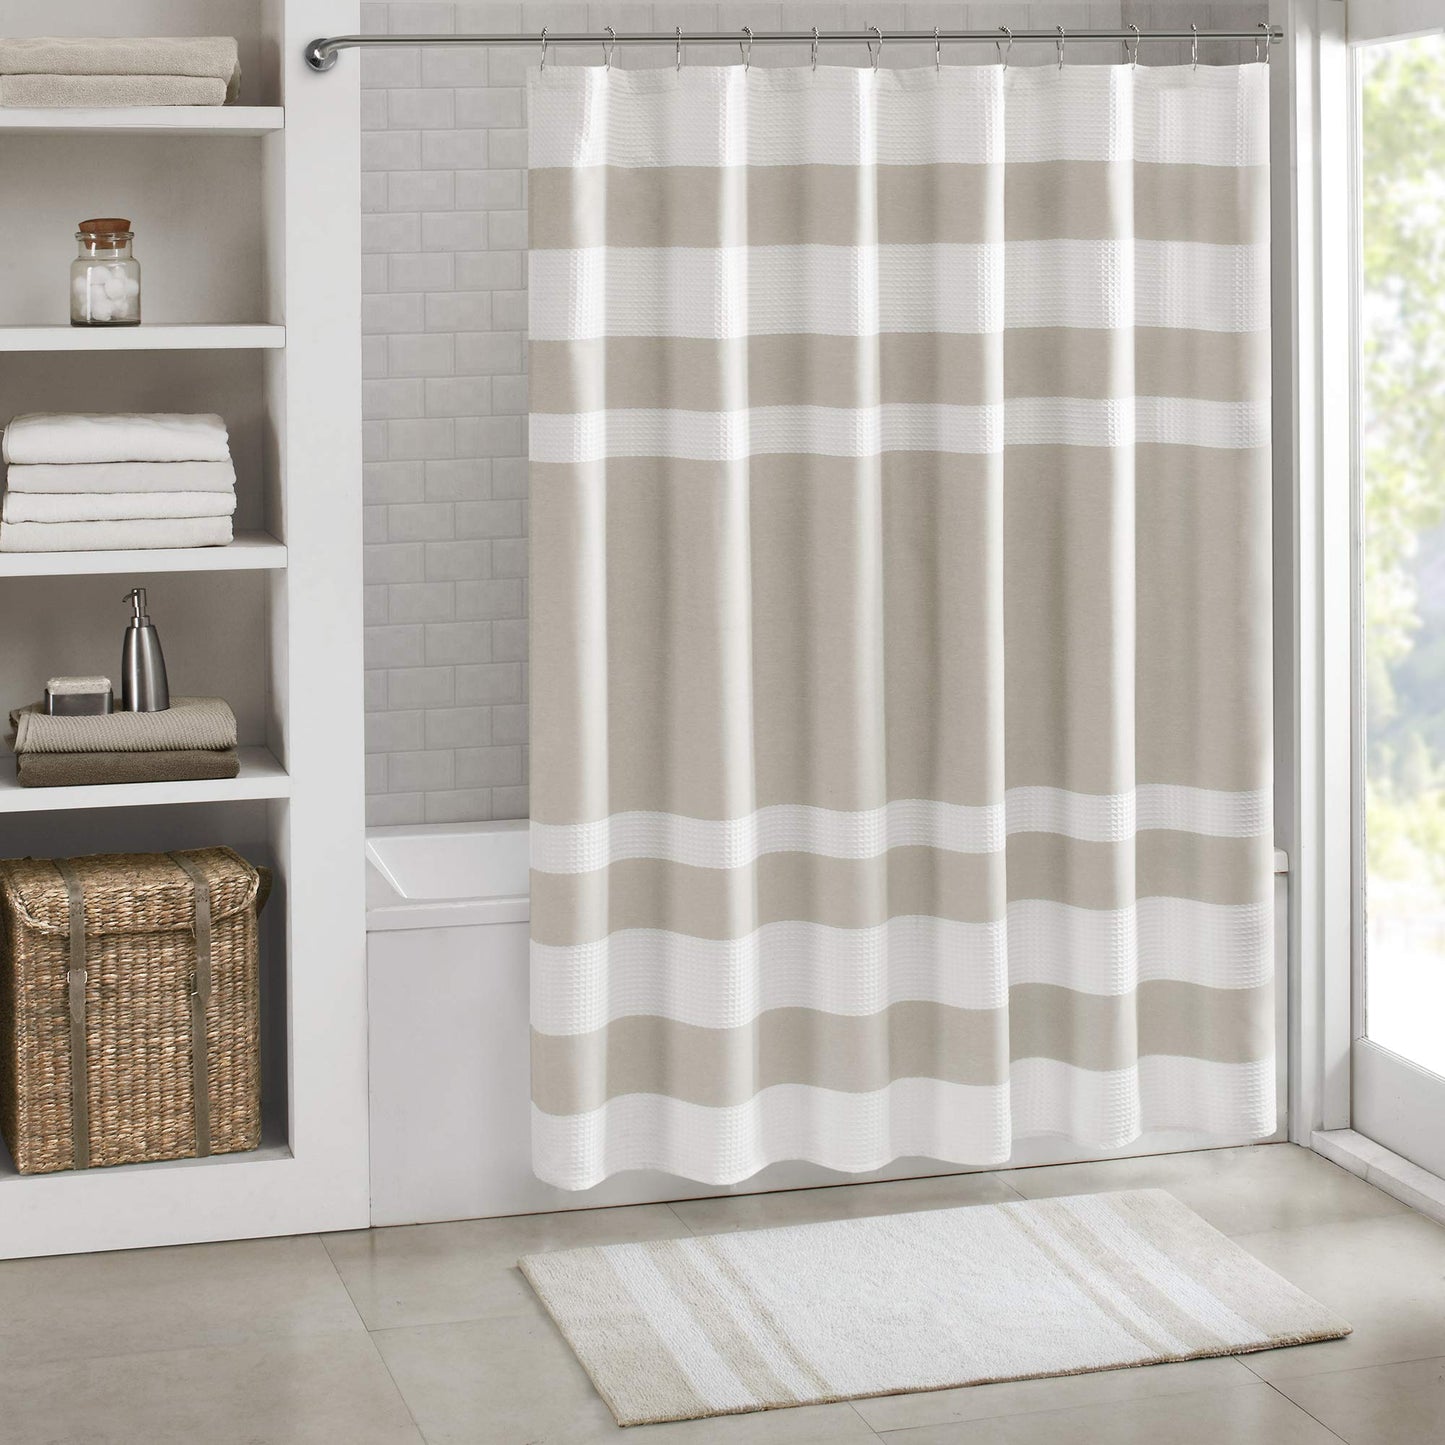 Madison Park Spa Waffle Shower Curtain with 3M Treatment, Taupe, 72x72"